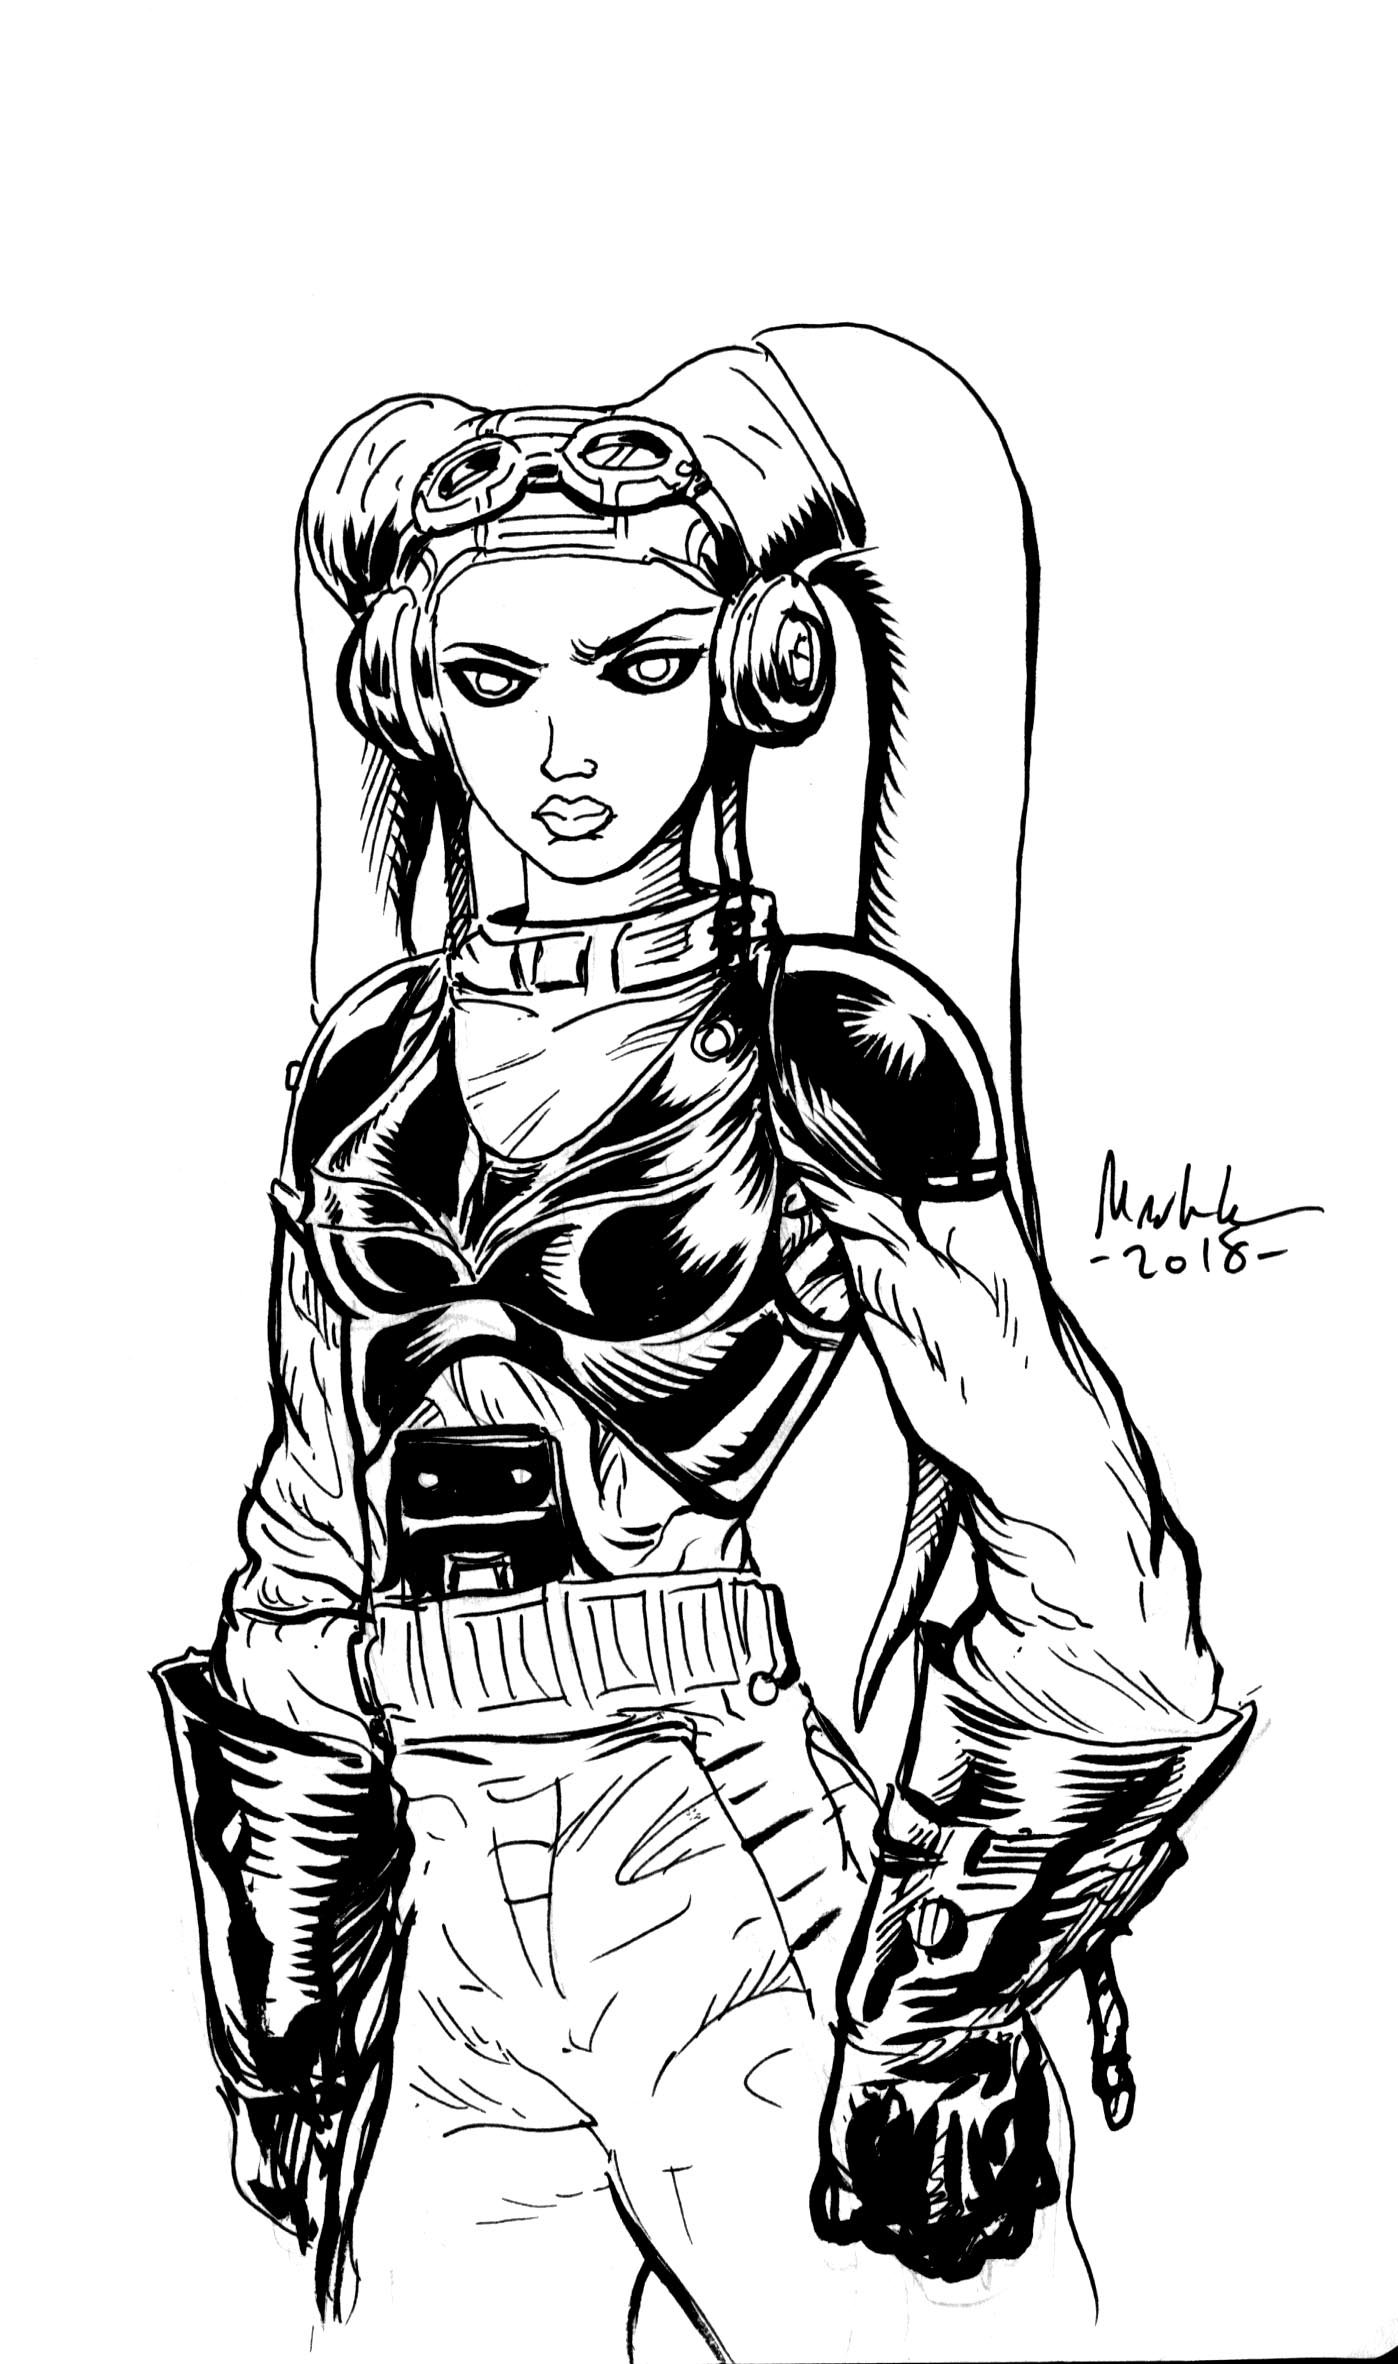 Image of Hera of ghost crew inked 5x7 inch piece